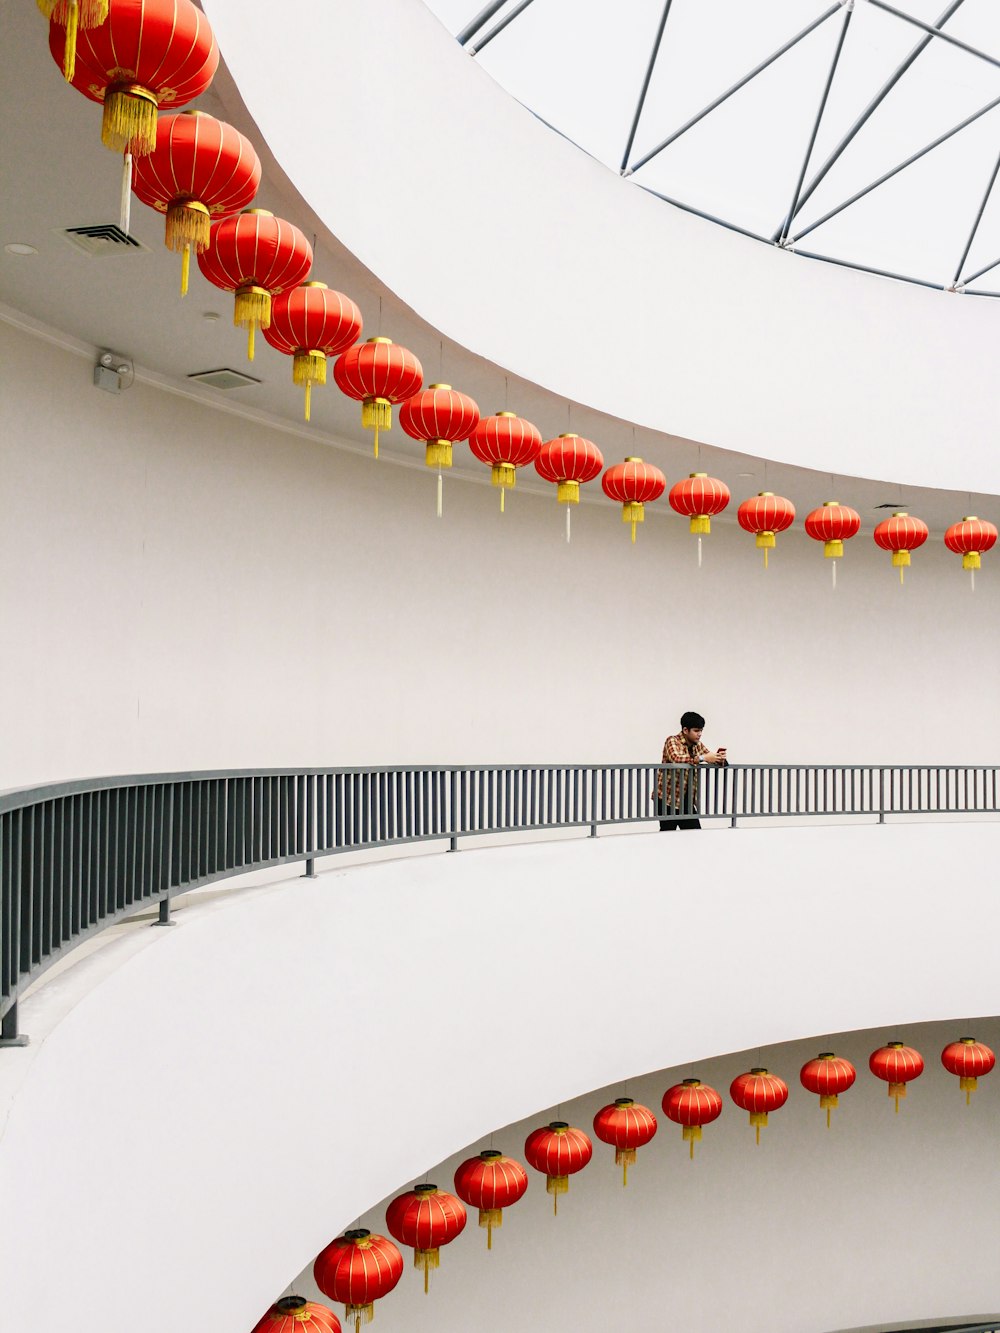 a person standing on a balcony with red lanterns